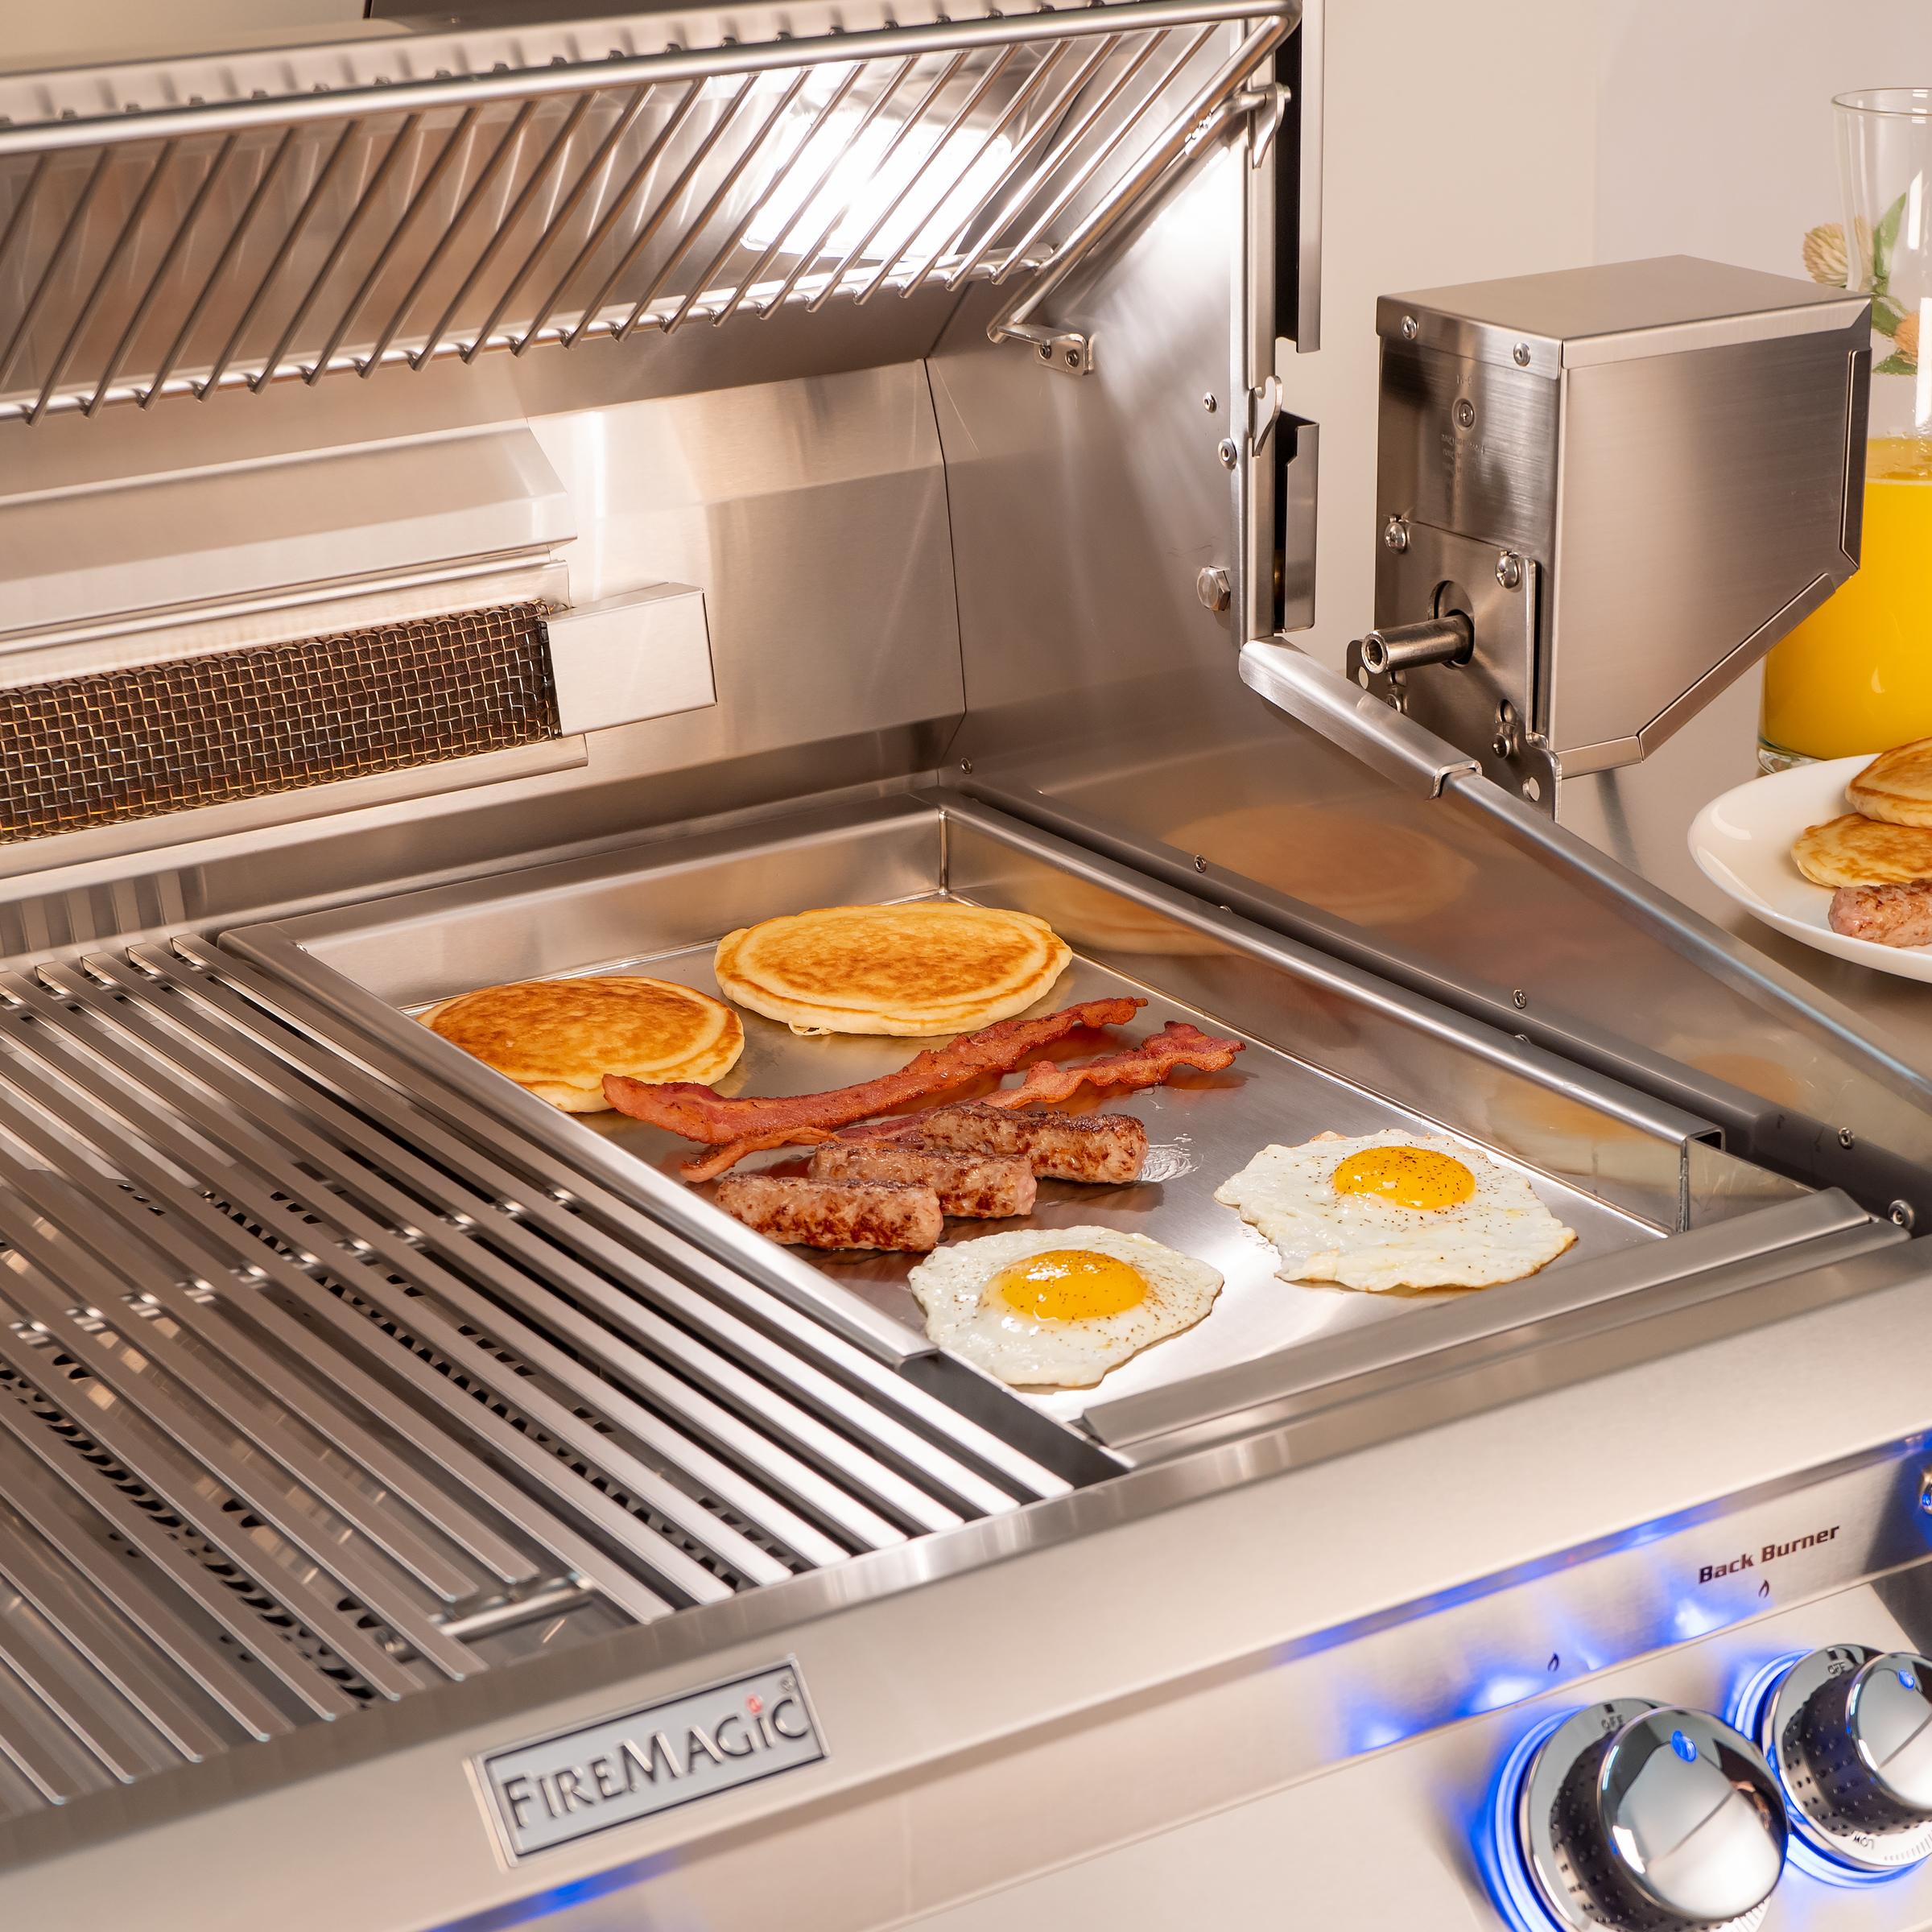 TEC PFRFGSS Commercial-Style Stainless Steel Griddle